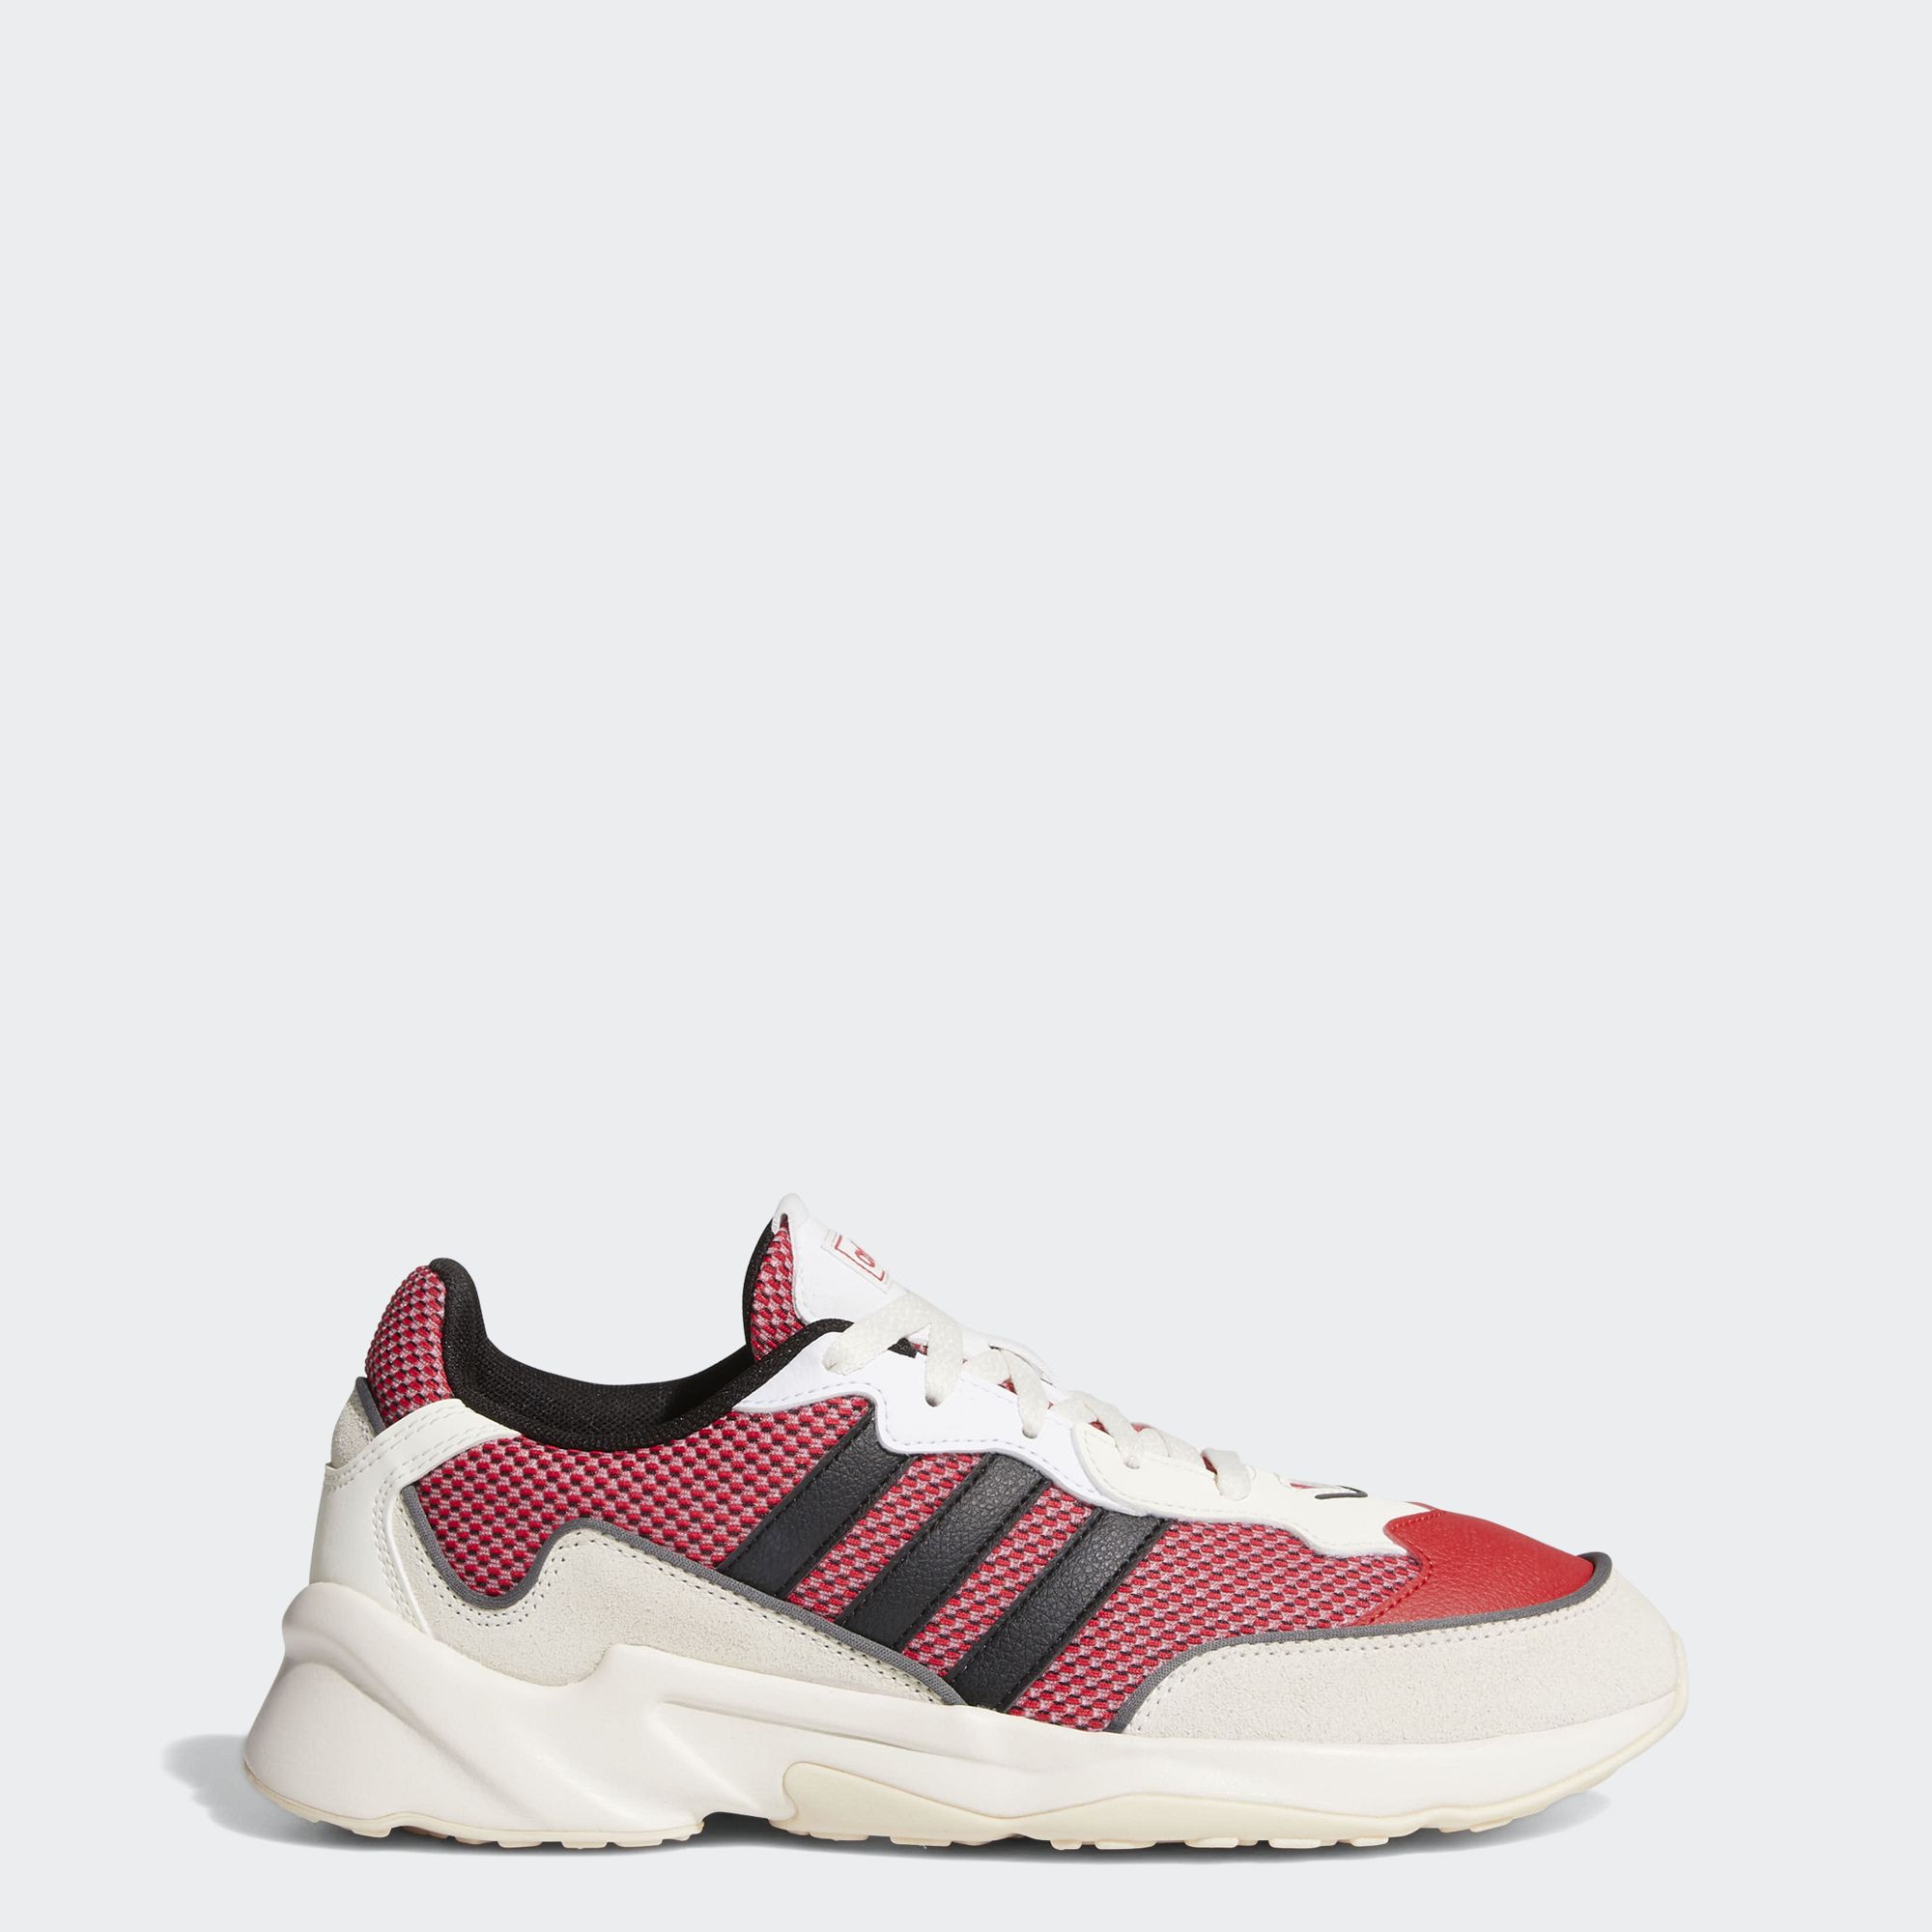 adidas inspired shoes